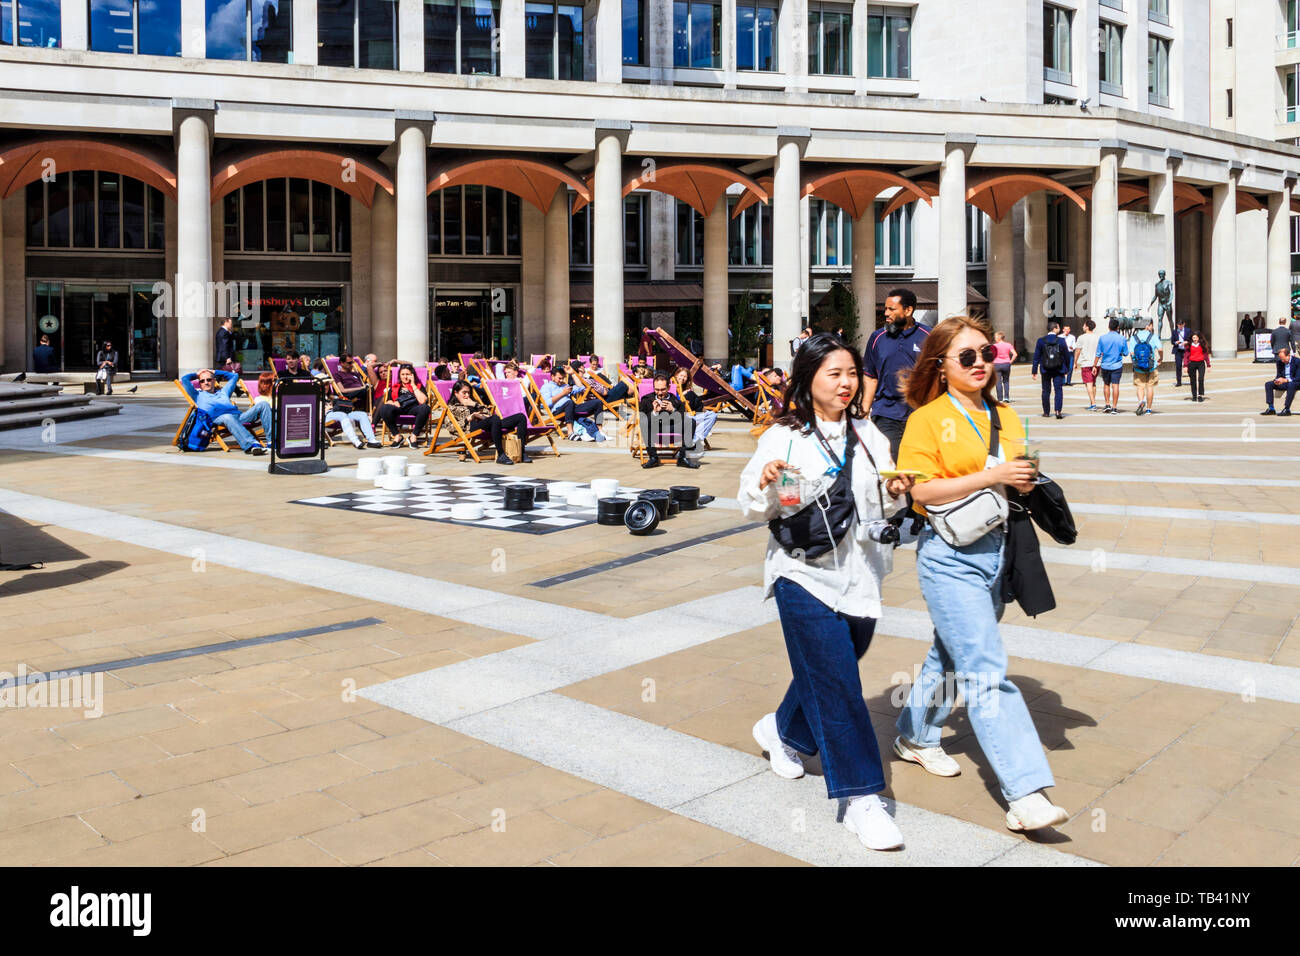 Tourists and sightseers in Paternoster Square in the City of London, UK Stock Photo